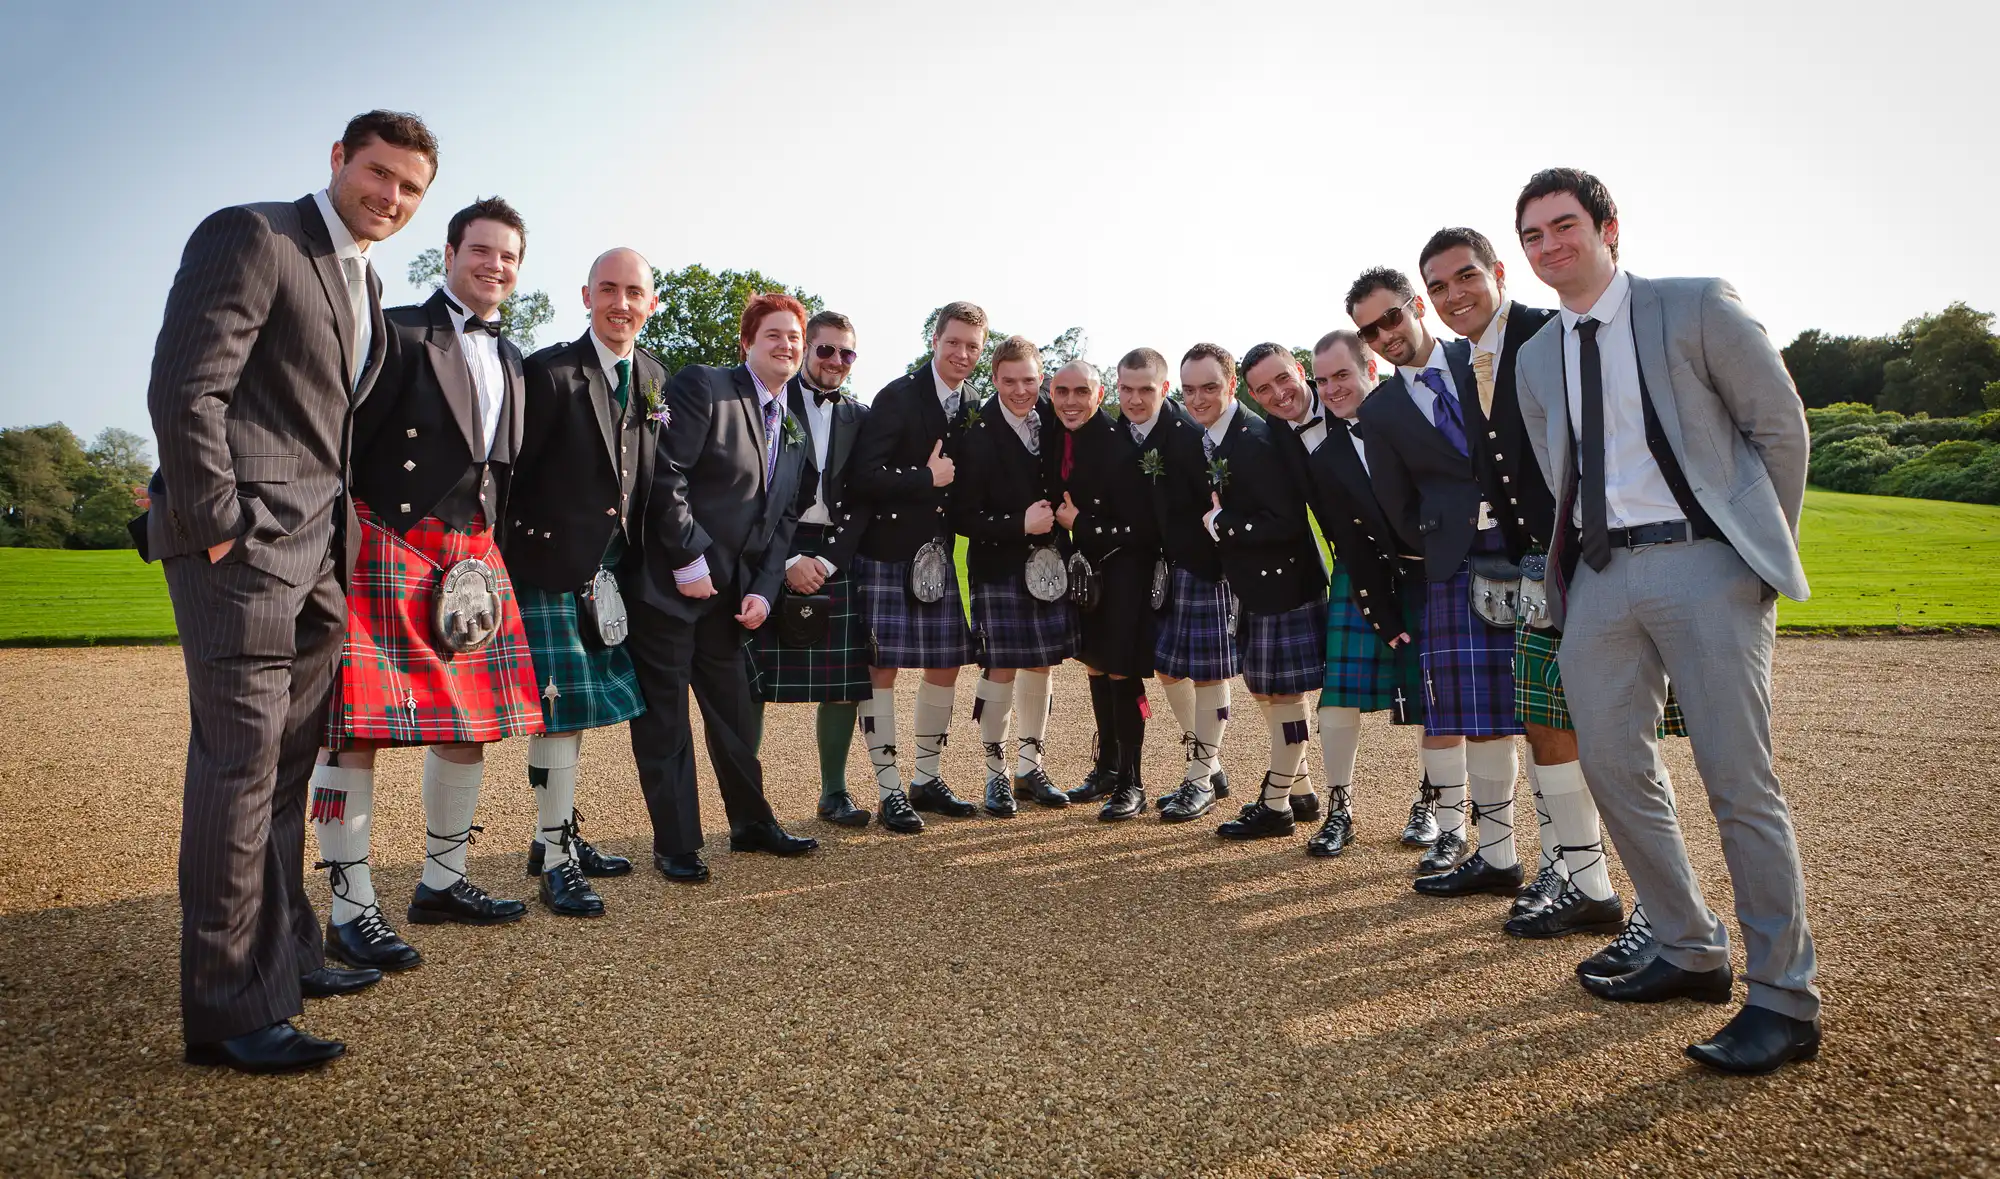 Group of men in formal attire and kilts posing outdoors on a sunny day, with trees and a clear sky in the background.